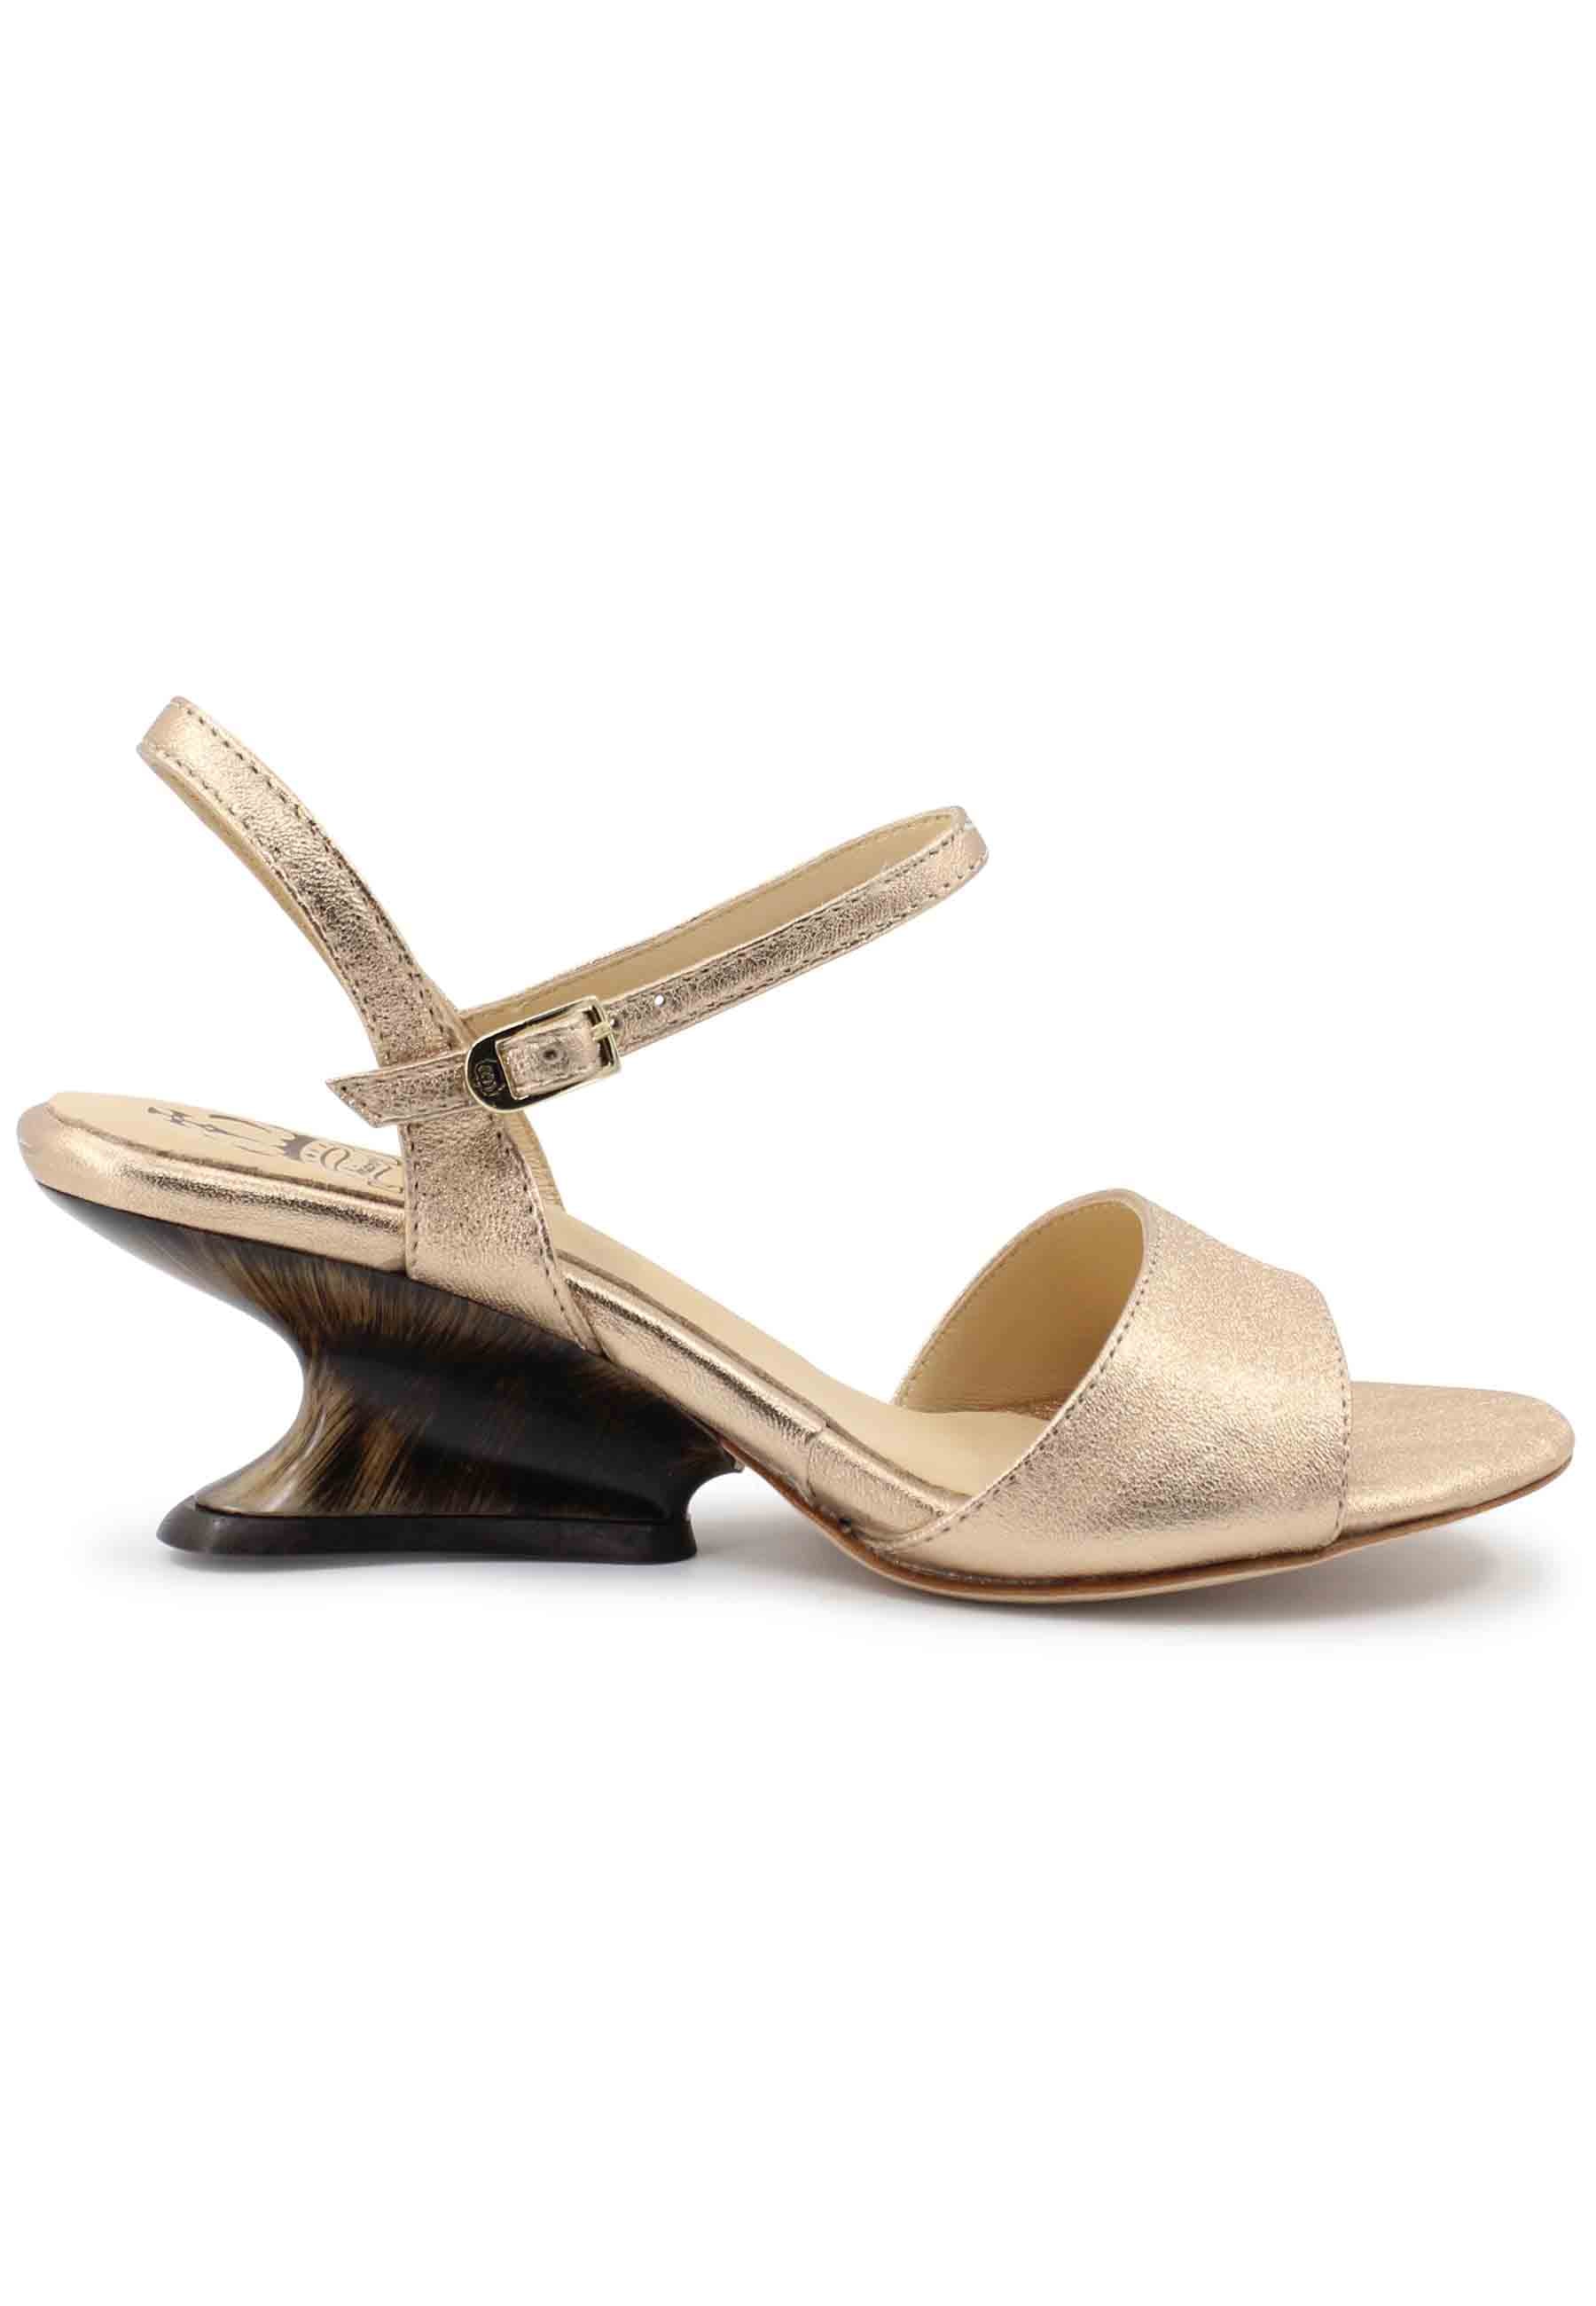 Women's sandals in nude laminated leather with low wedge